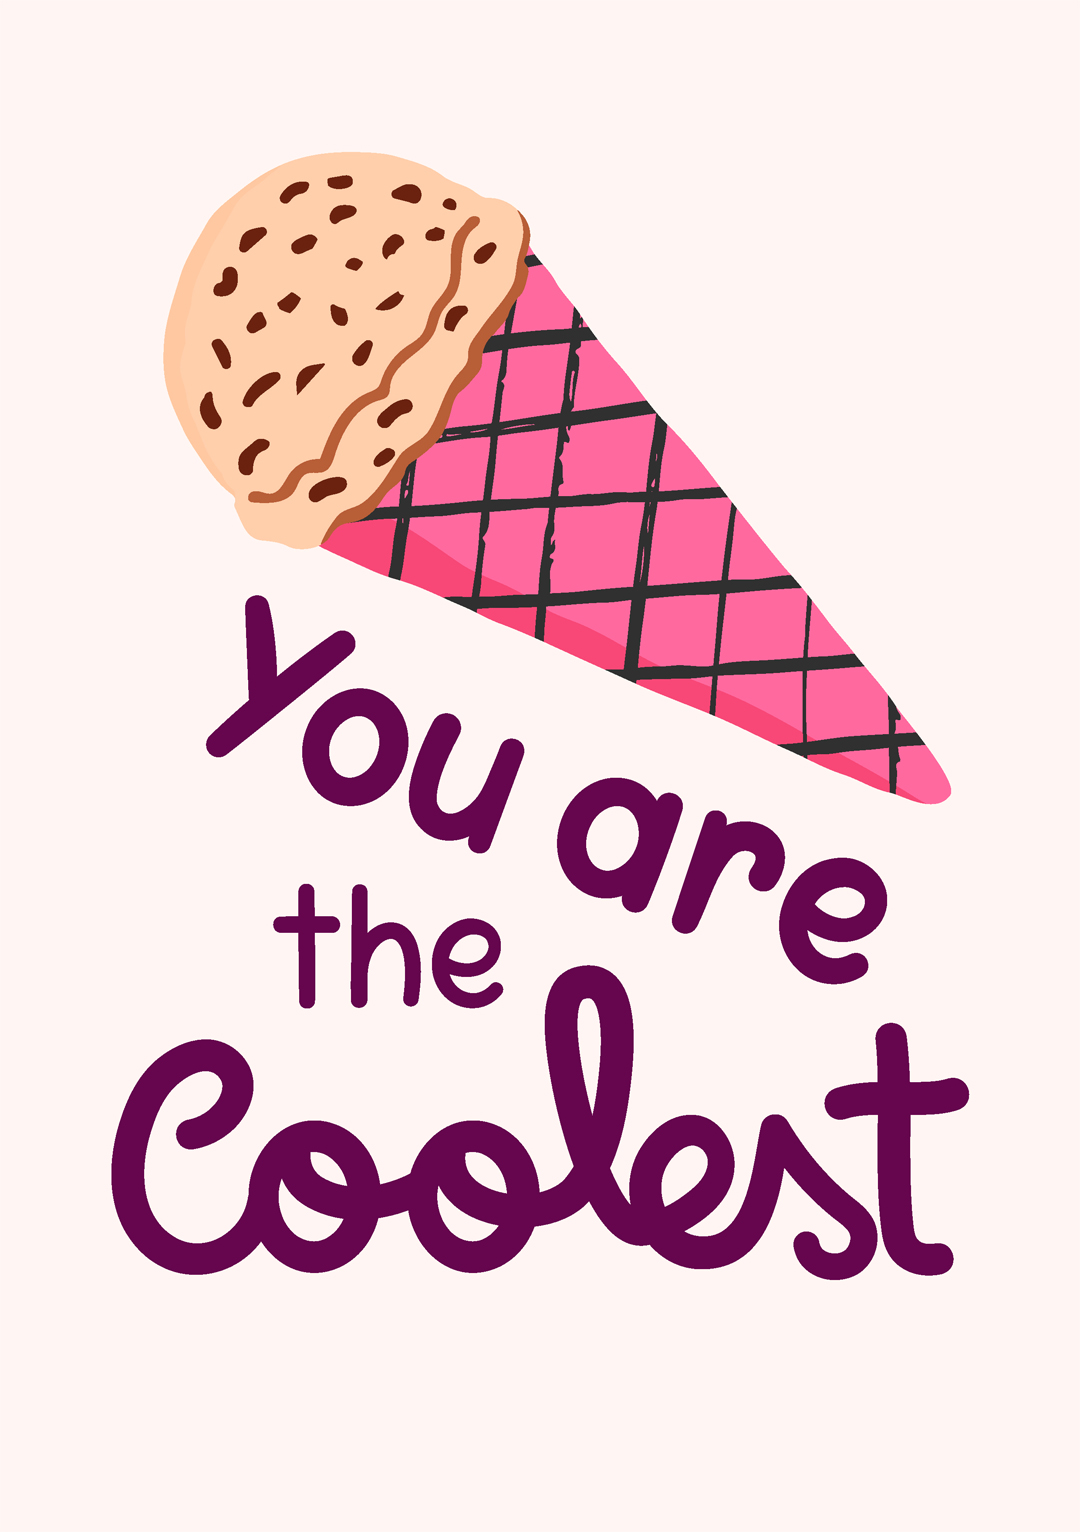 you are the coolest greeting card